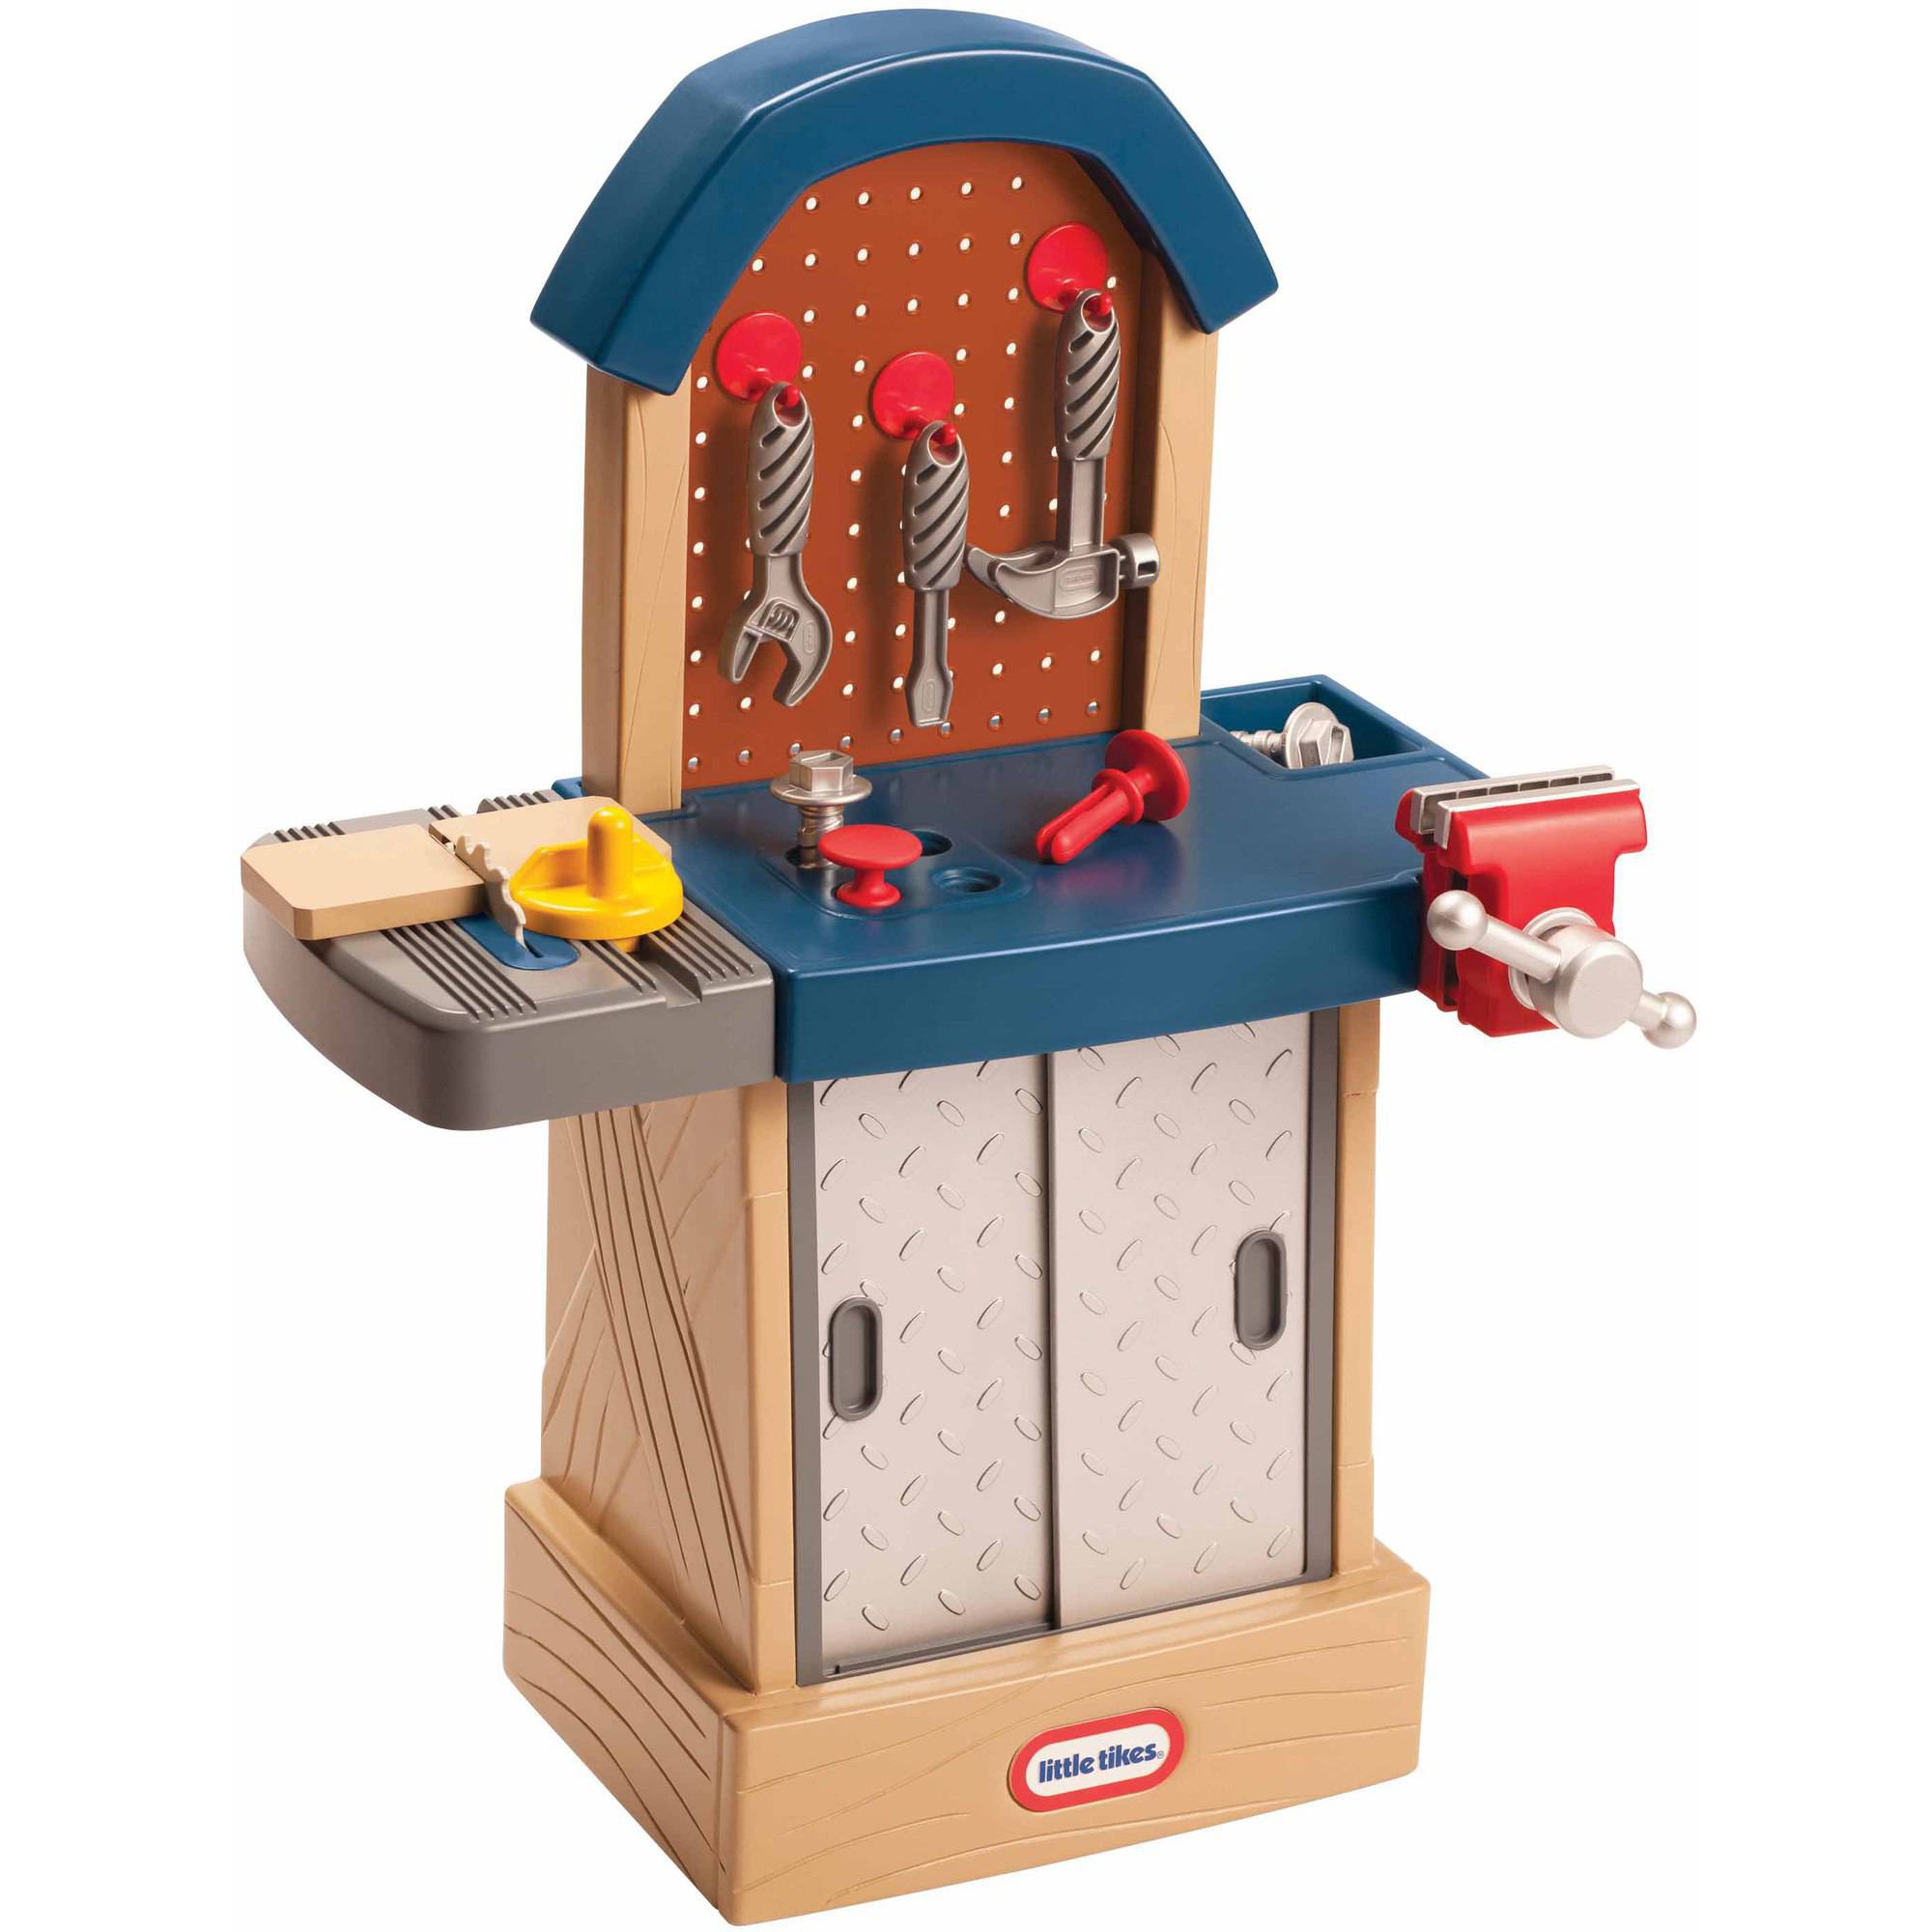 Little Tikes Tough Workshop Construction Play Set with 11 Pieces Including Tools and Workbench Pretend Play for Kids Toddler Boys Girls Ages 2 3 4 5+ - image 1 of 5